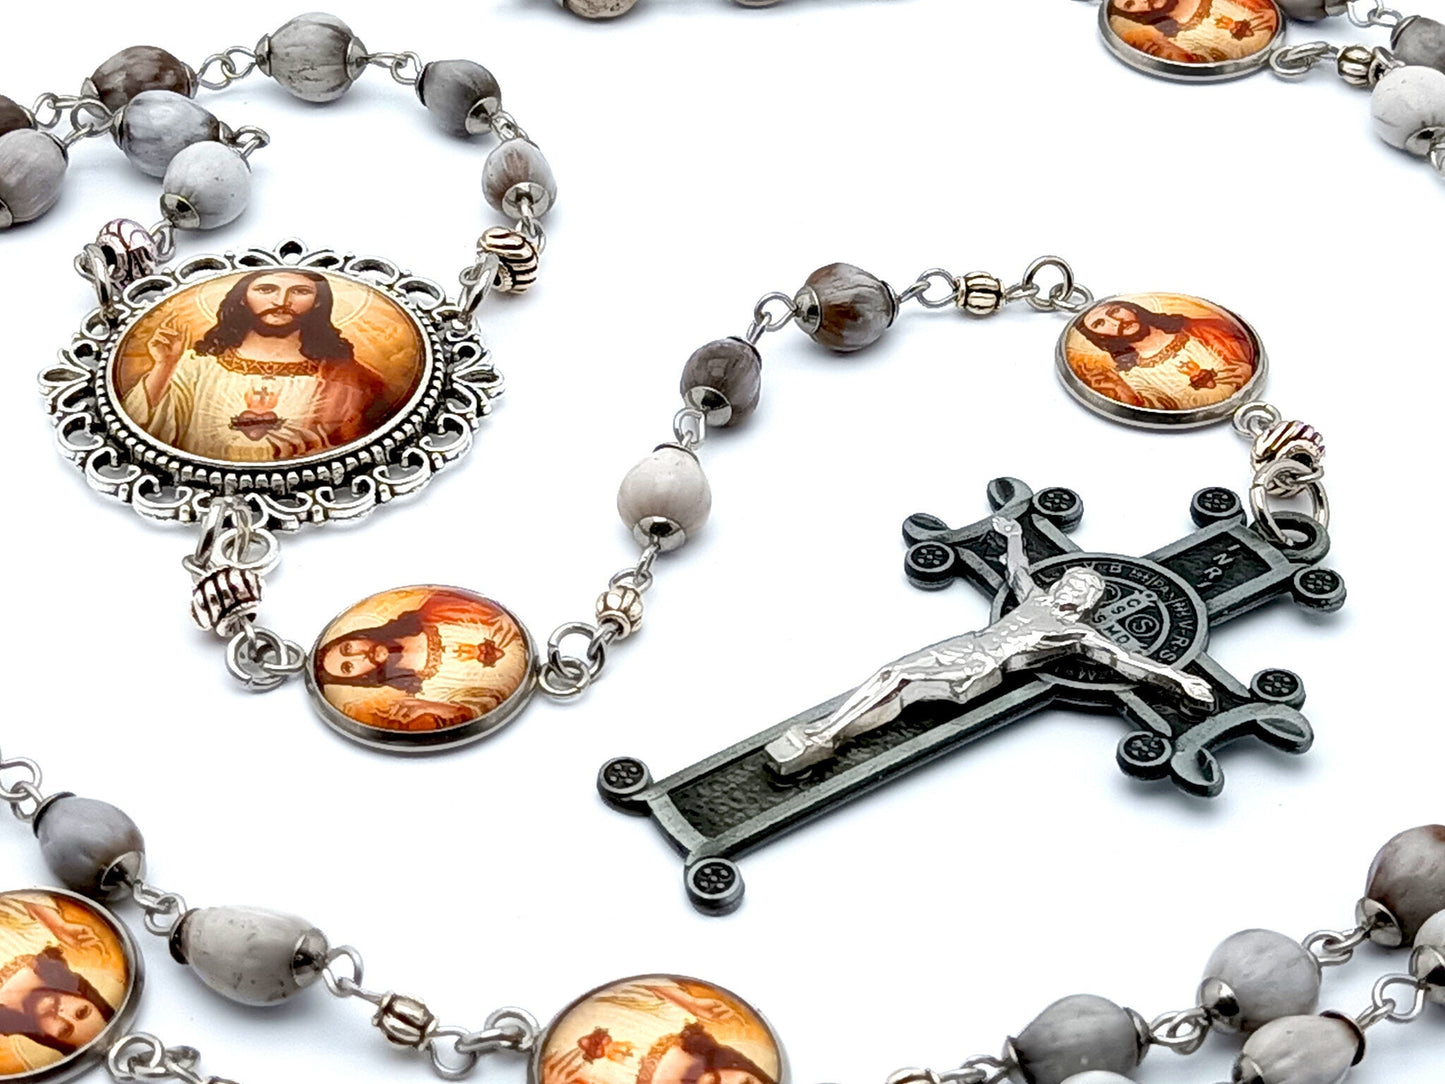 Sacred Heart of Jesus unique rosary beads Jobs tears and stainless steel rosary beads with pewter style Saint Benedict crucifix.